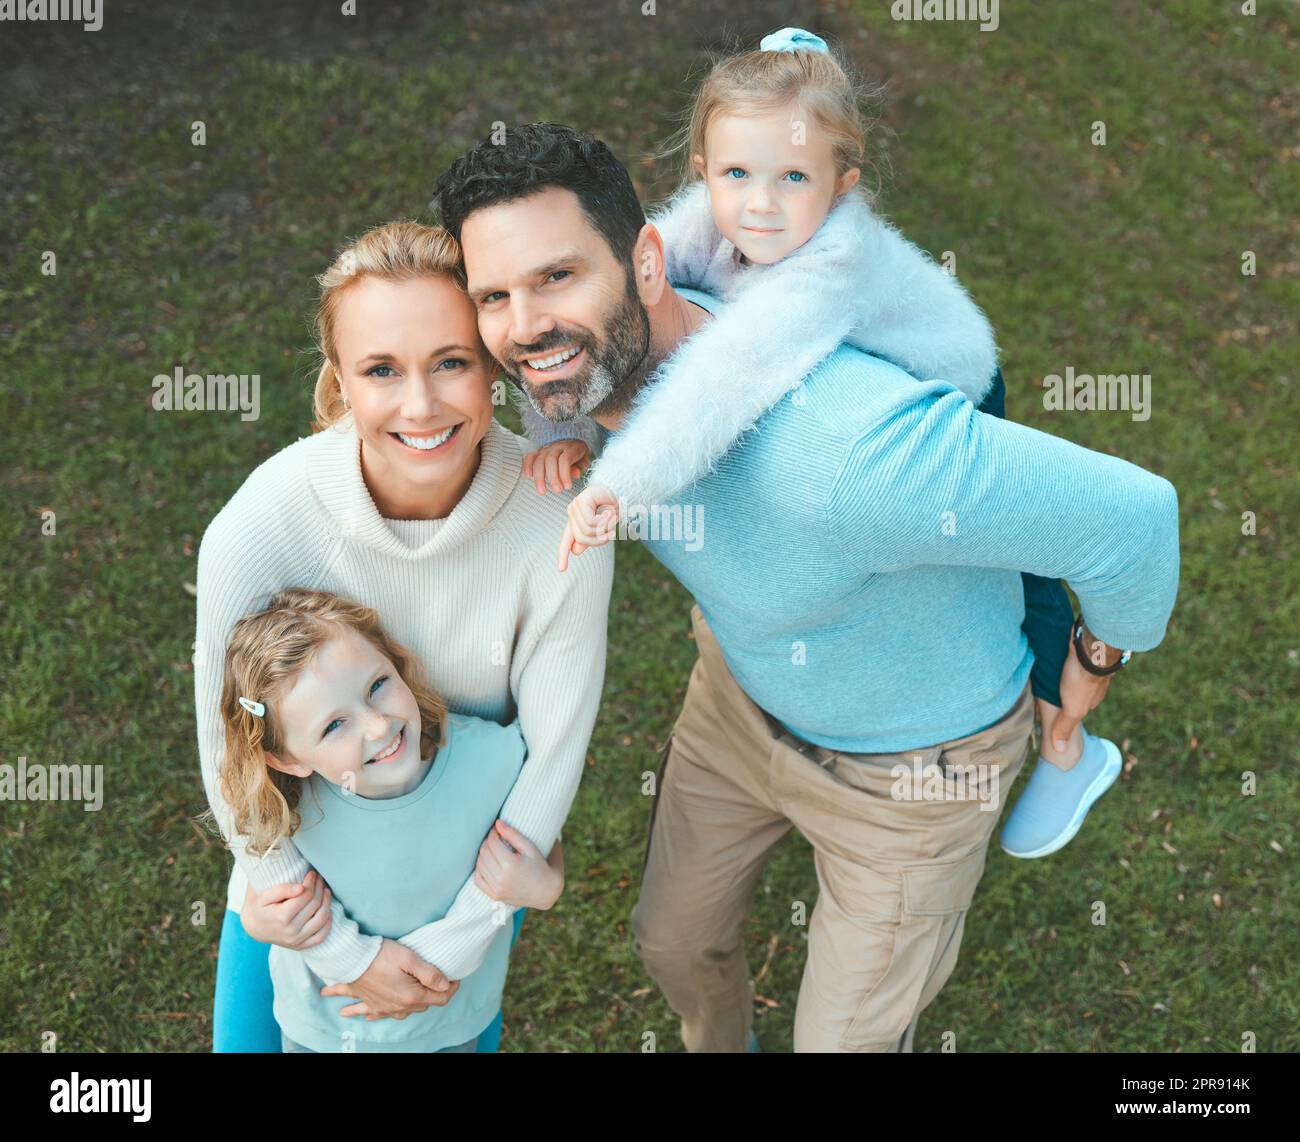 The heart of a family is the masterpiece of nature. a couple and their two daughters posing together in a park. Stock Photo